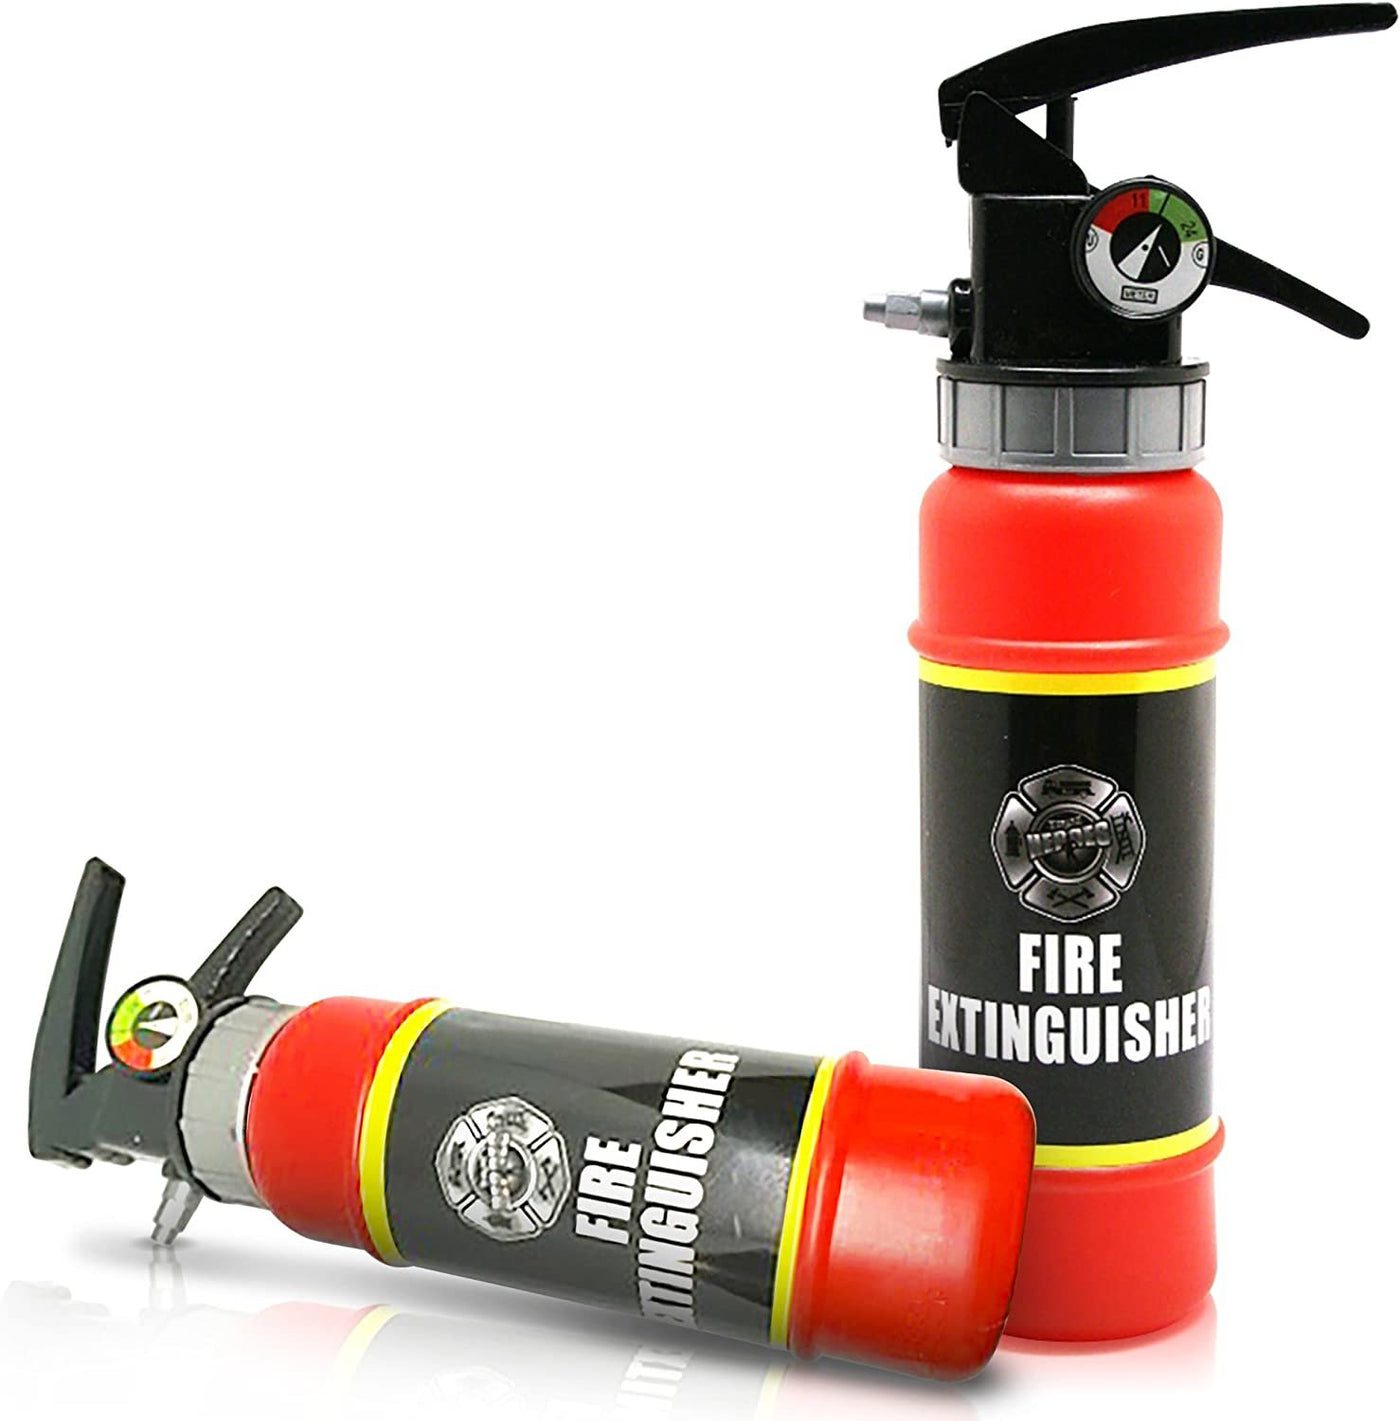 ArtCreativity Fire Extinguisher Squirter Toy - Pack of 2 - 9 Inch Water Extinguisher with Realistic Design - Fun Outdoor Summer Toy for Boys and Girls - Great Fireman Toy for Kids, Novelty Gag Gift